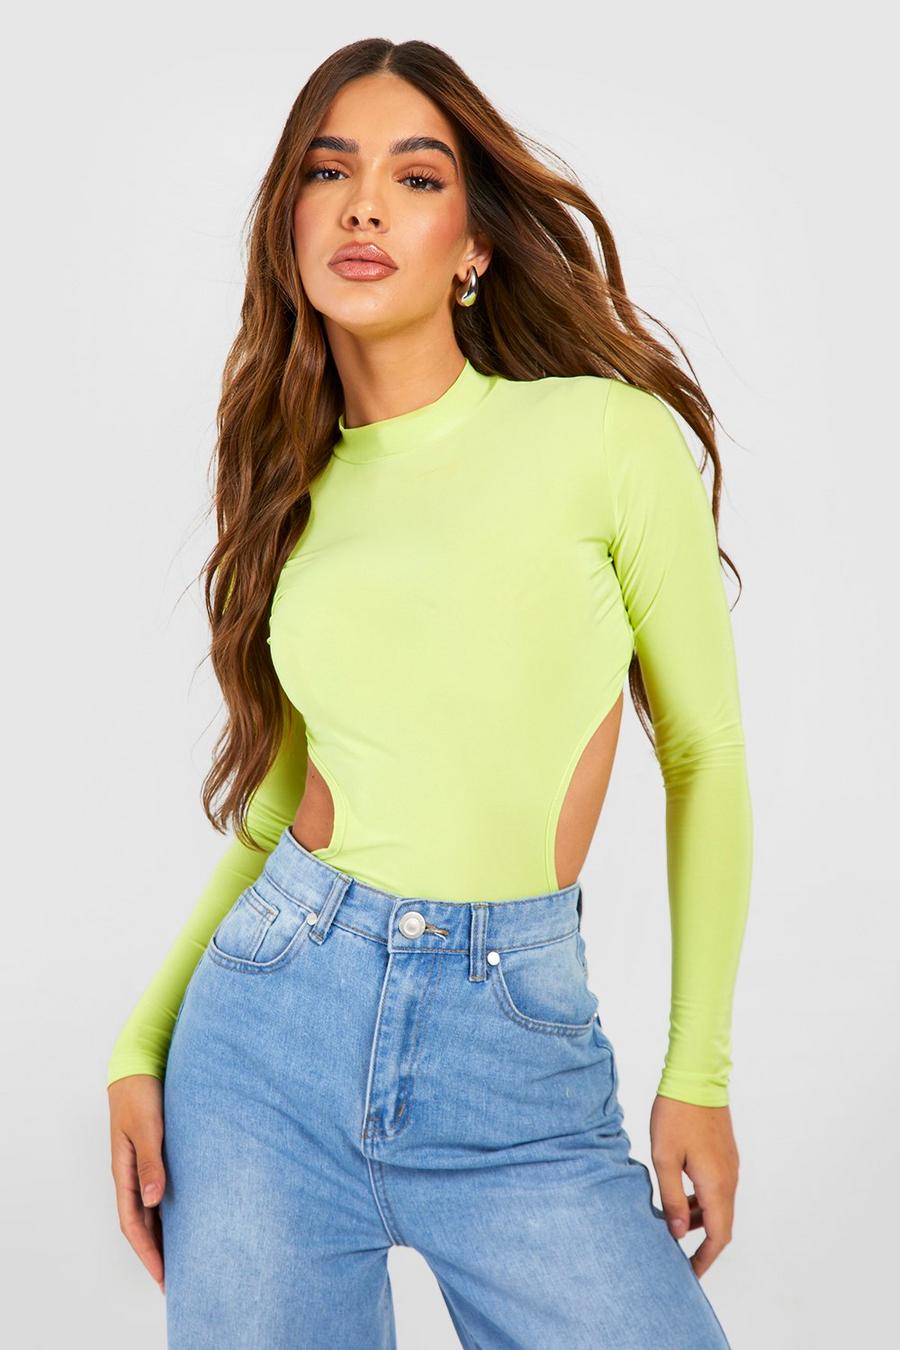 Ladies sexy Neon Green Roll Neck Bodysuit by BOOHOO, New, size 6 8 12